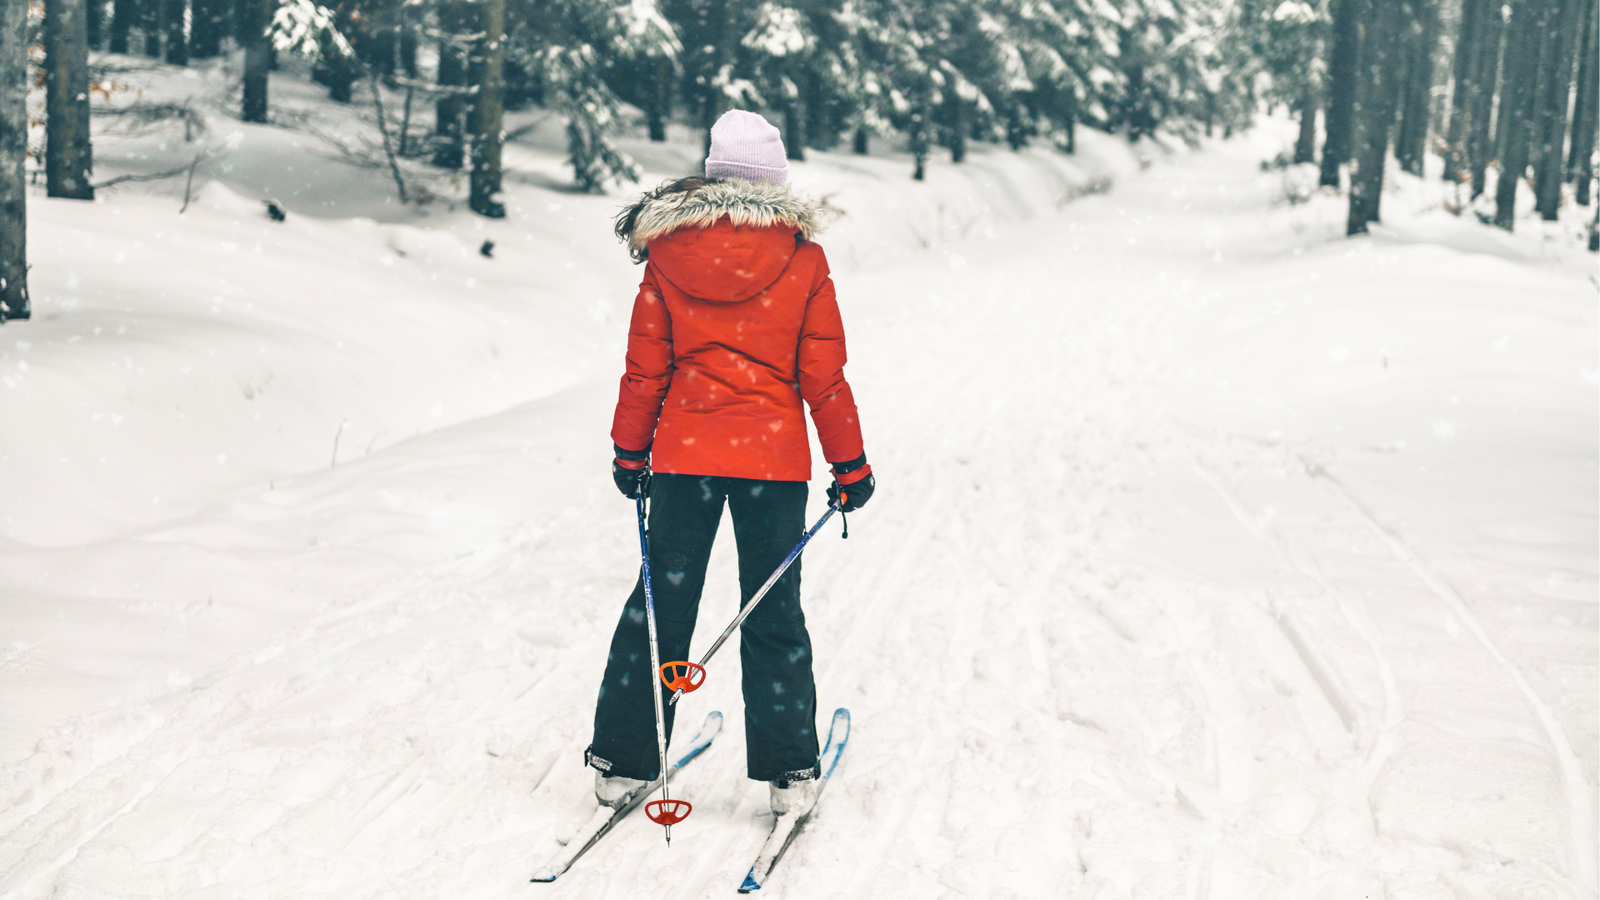 Can You Downhill ski with Cross-country skis?